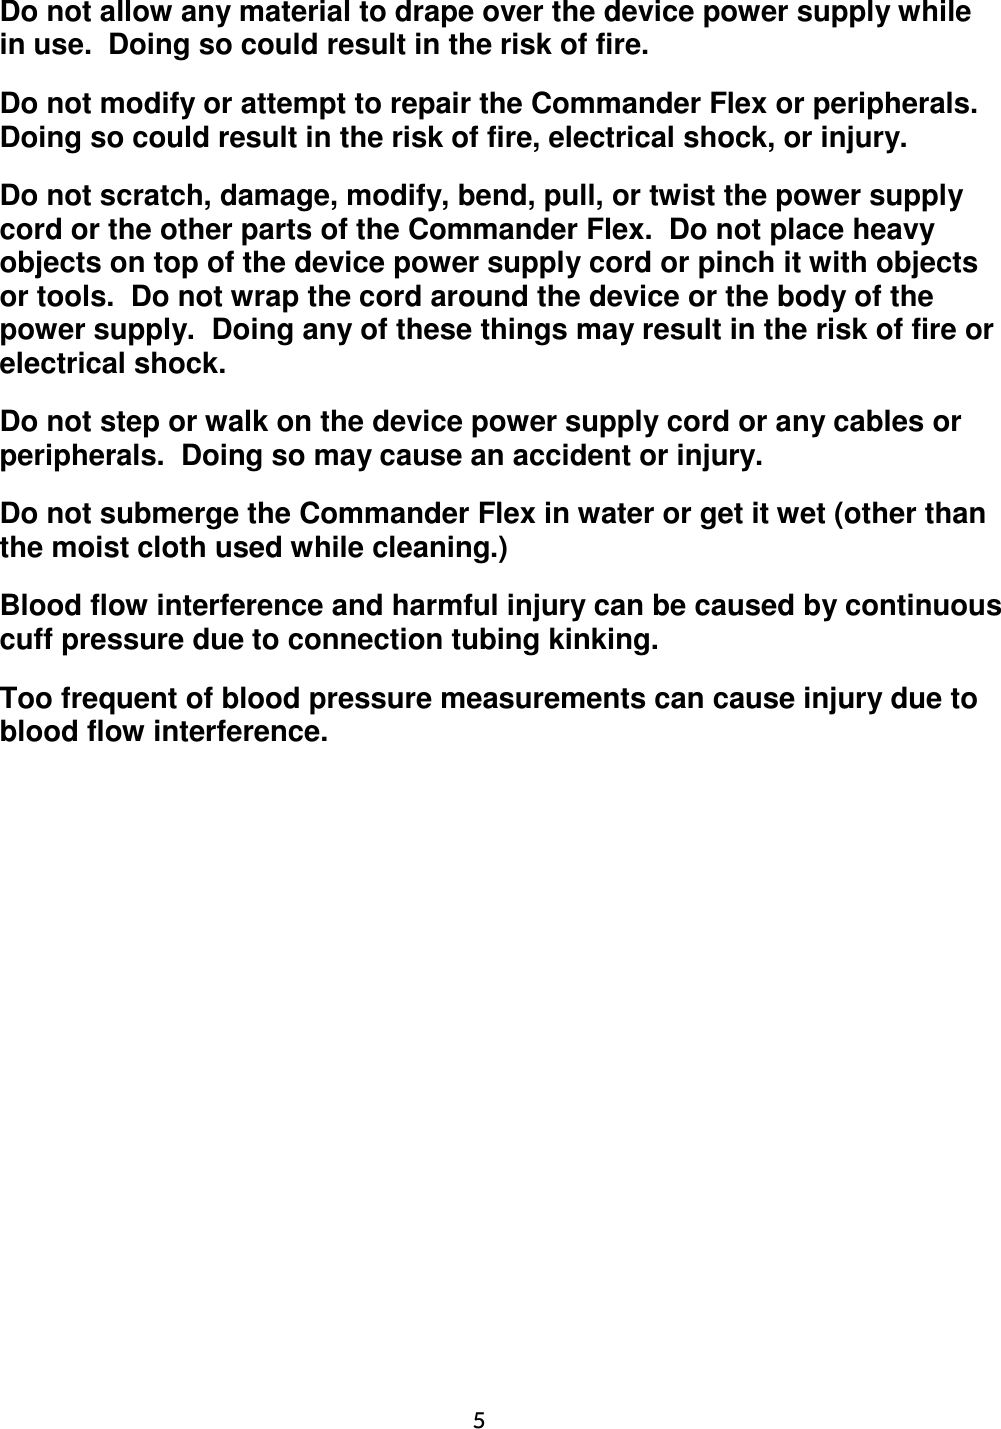     5  Do not allow any material to drape over the device power supply while in use.  Doing so could result in the risk of fire. Do not modify or attempt to repair the Commander Flex or peripherals.  Doing so could result in the risk of fire, electrical shock, or injury. Do not scratch, damage, modify, bend, pull, or twist the power supply cord or the other parts of the Commander Flex.  Do not place heavy objects on top of the device power supply cord or pinch it with objects or tools.  Do not wrap the cord around the device or the body of the power supply.  Doing any of these things may result in the risk of fire or electrical shock. Do not step or walk on the device power supply cord or any cables or peripherals.  Doing so may cause an accident or injury. Do not submerge the Commander Flex in water or get it wet (other than the moist cloth used while cleaning.) Blood flow interference and harmful injury can be caused by continuous cuff pressure due to connection tubing kinking. Too frequent of blood pressure measurements can cause injury due to blood flow interference.  